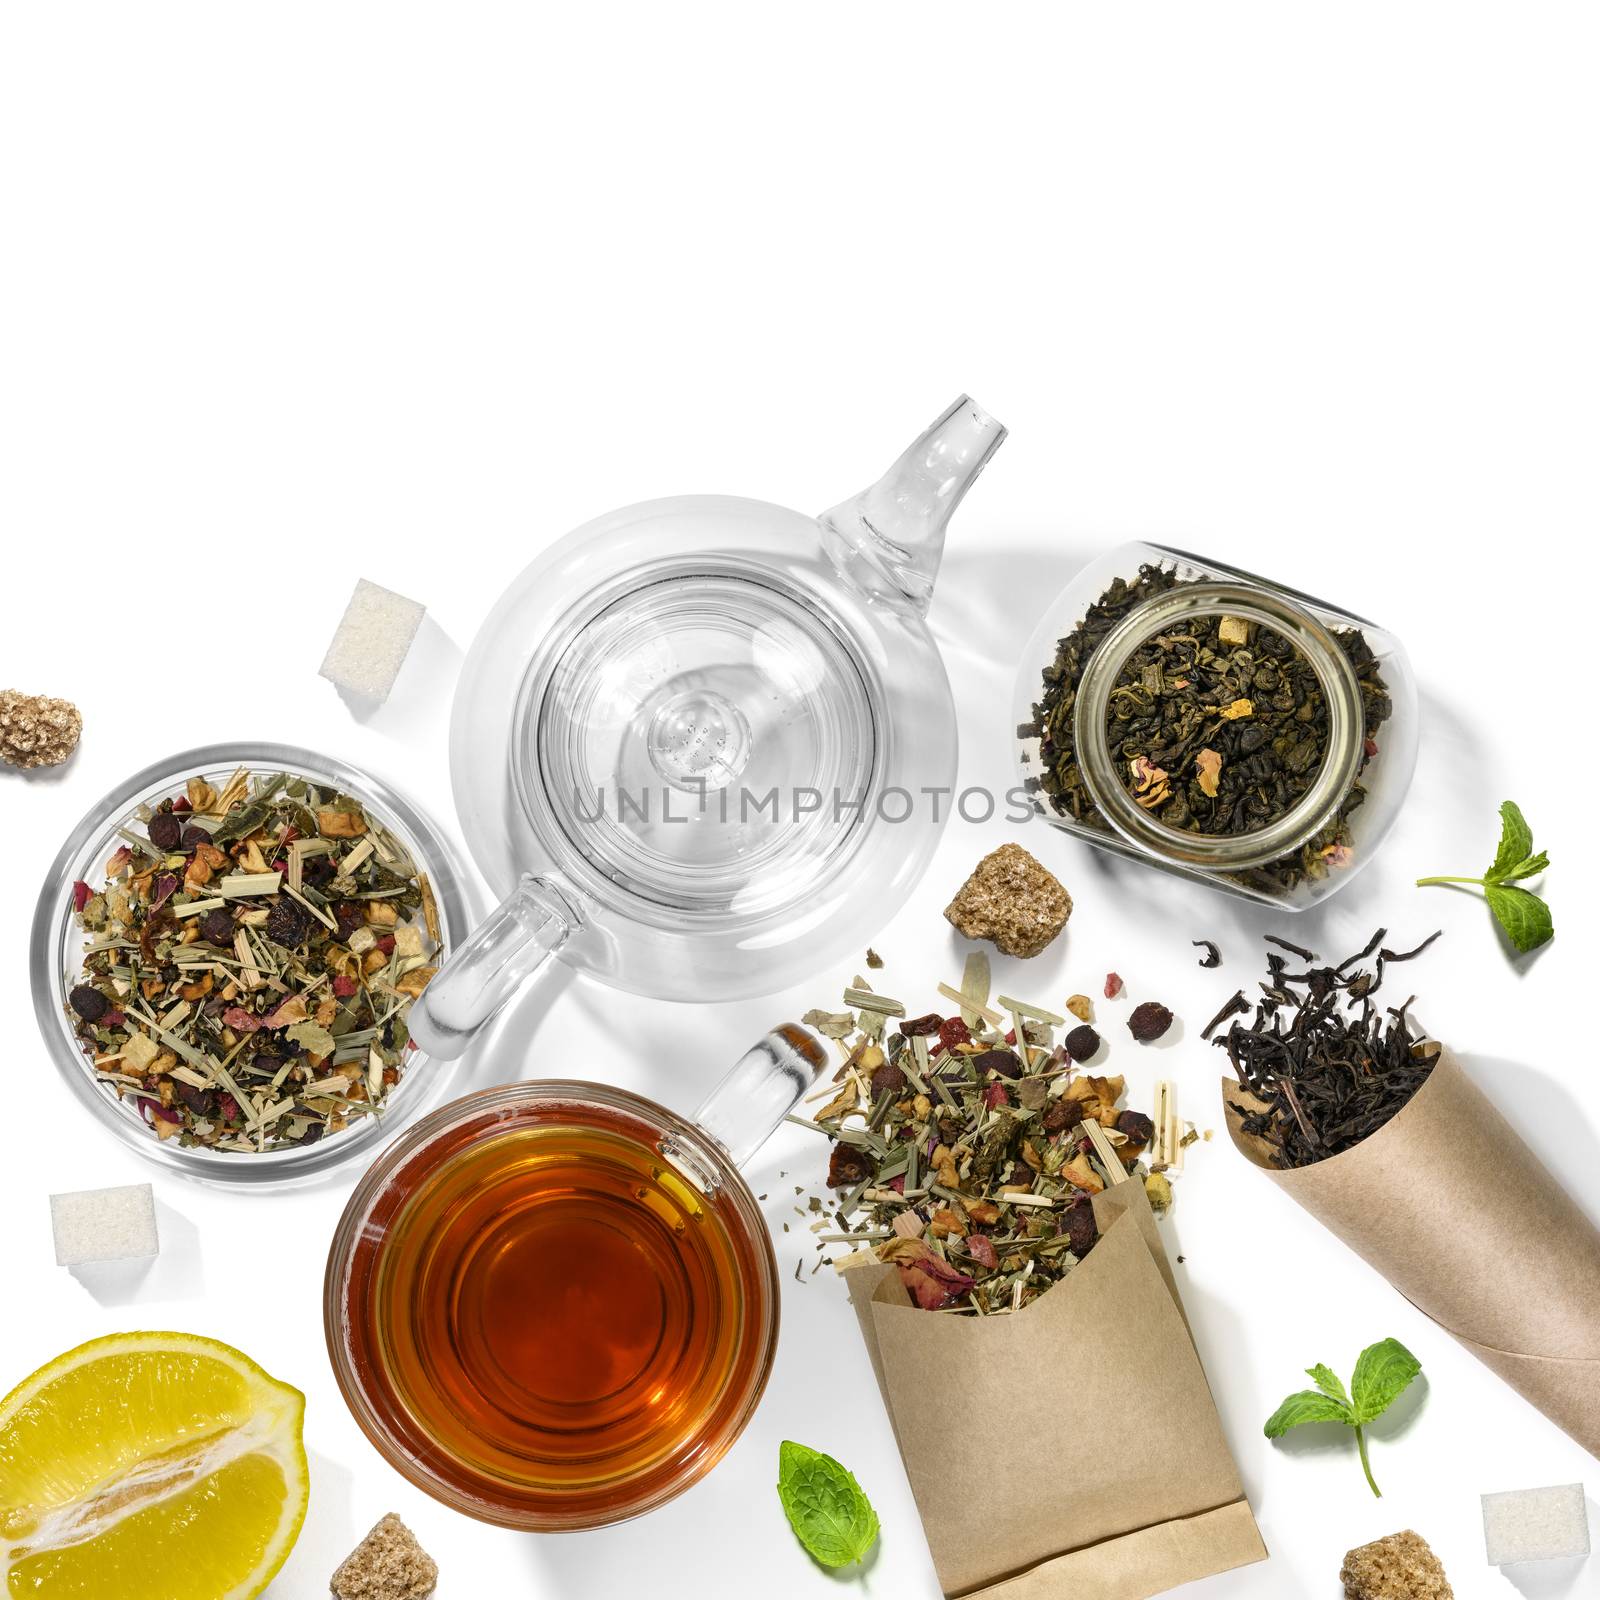 Picking of herbs, berries, tea and accessories. Top view on white background by butenkow